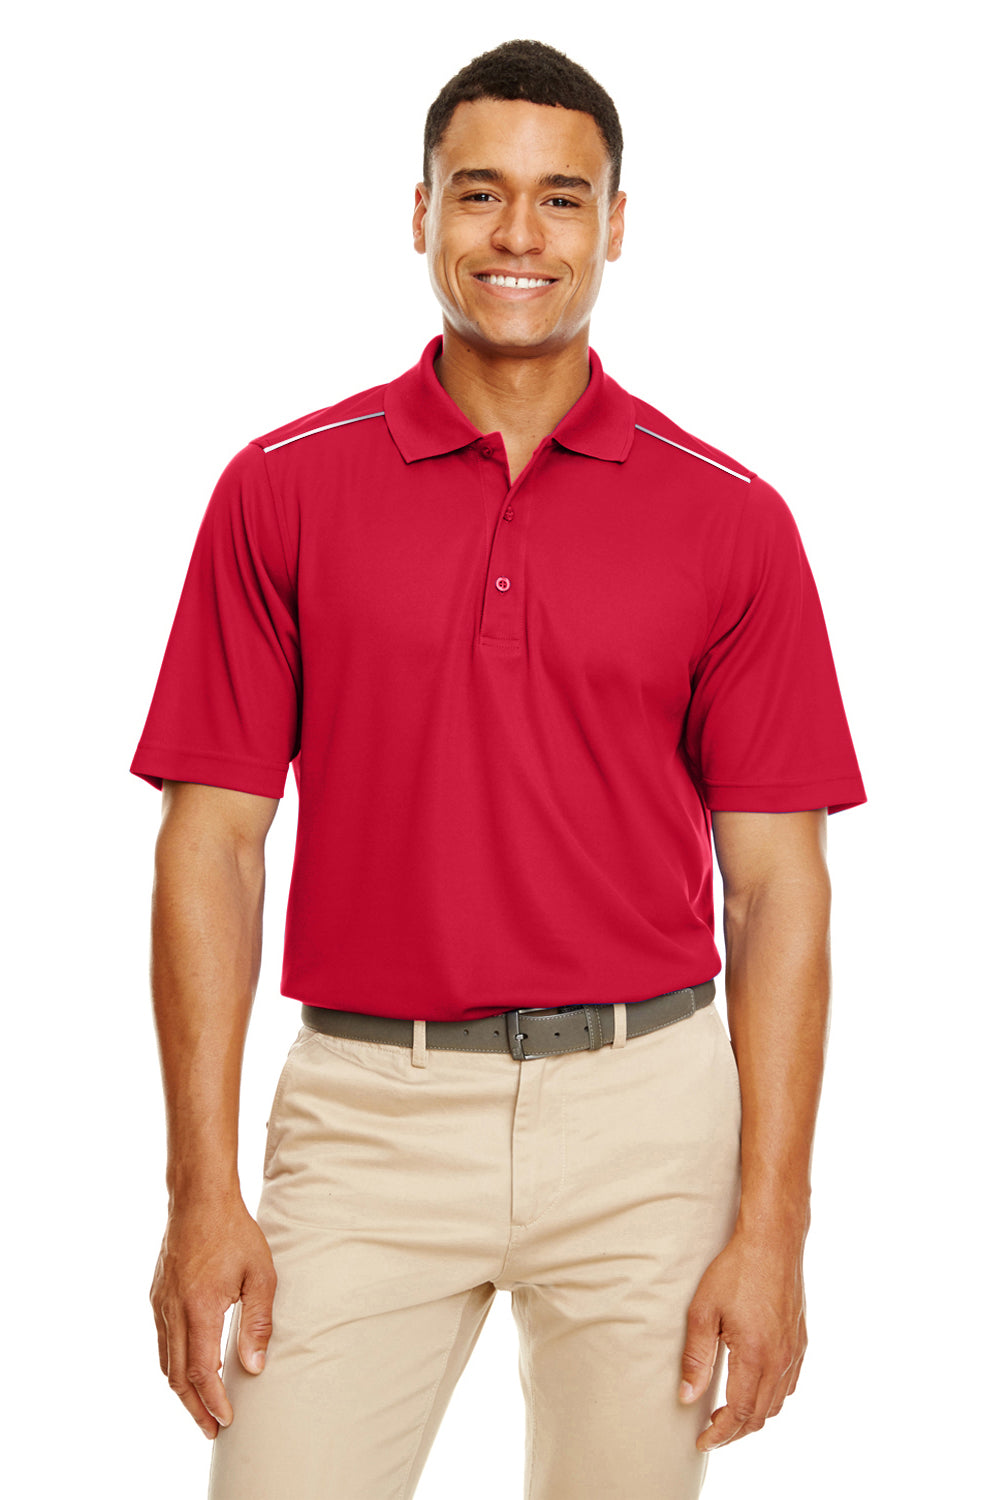 Core 365 88181R Mens Radiant Performance Moisture Wicking Short Sleeve Polo Shirt Red Front